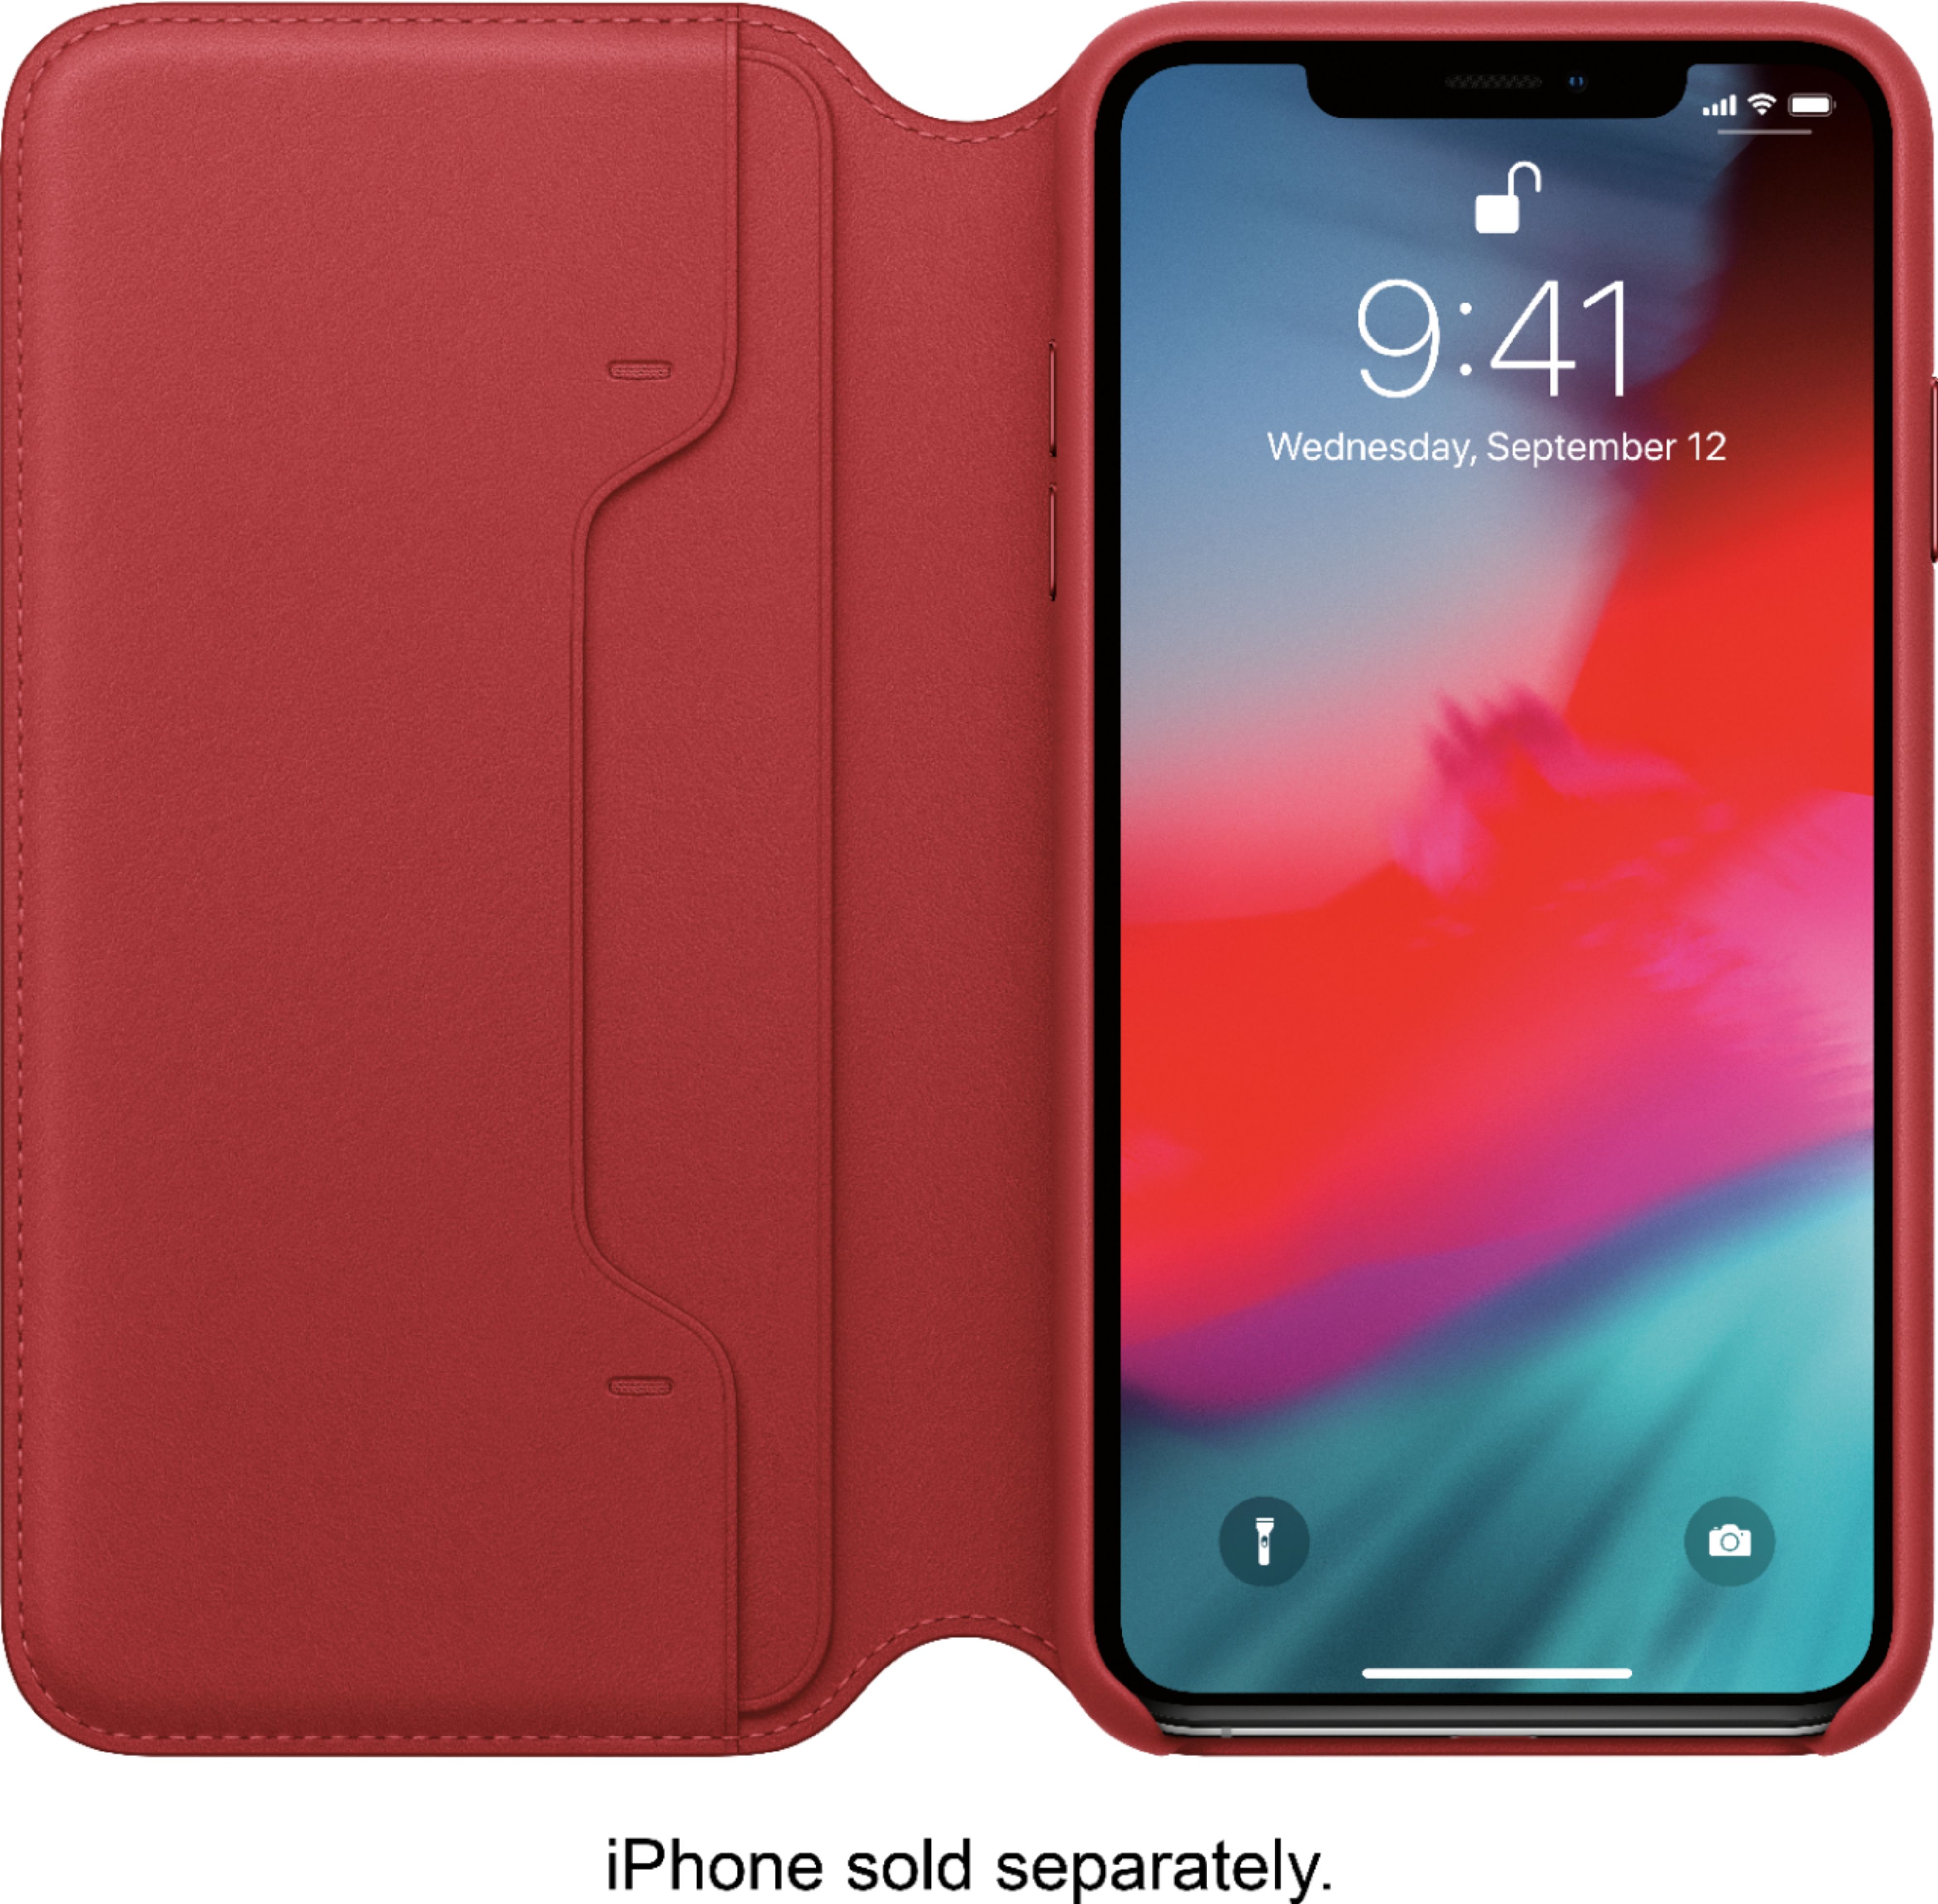 Apple's new Leather Folio is like a Smart Cover for your iPhone X - 9to5Mac